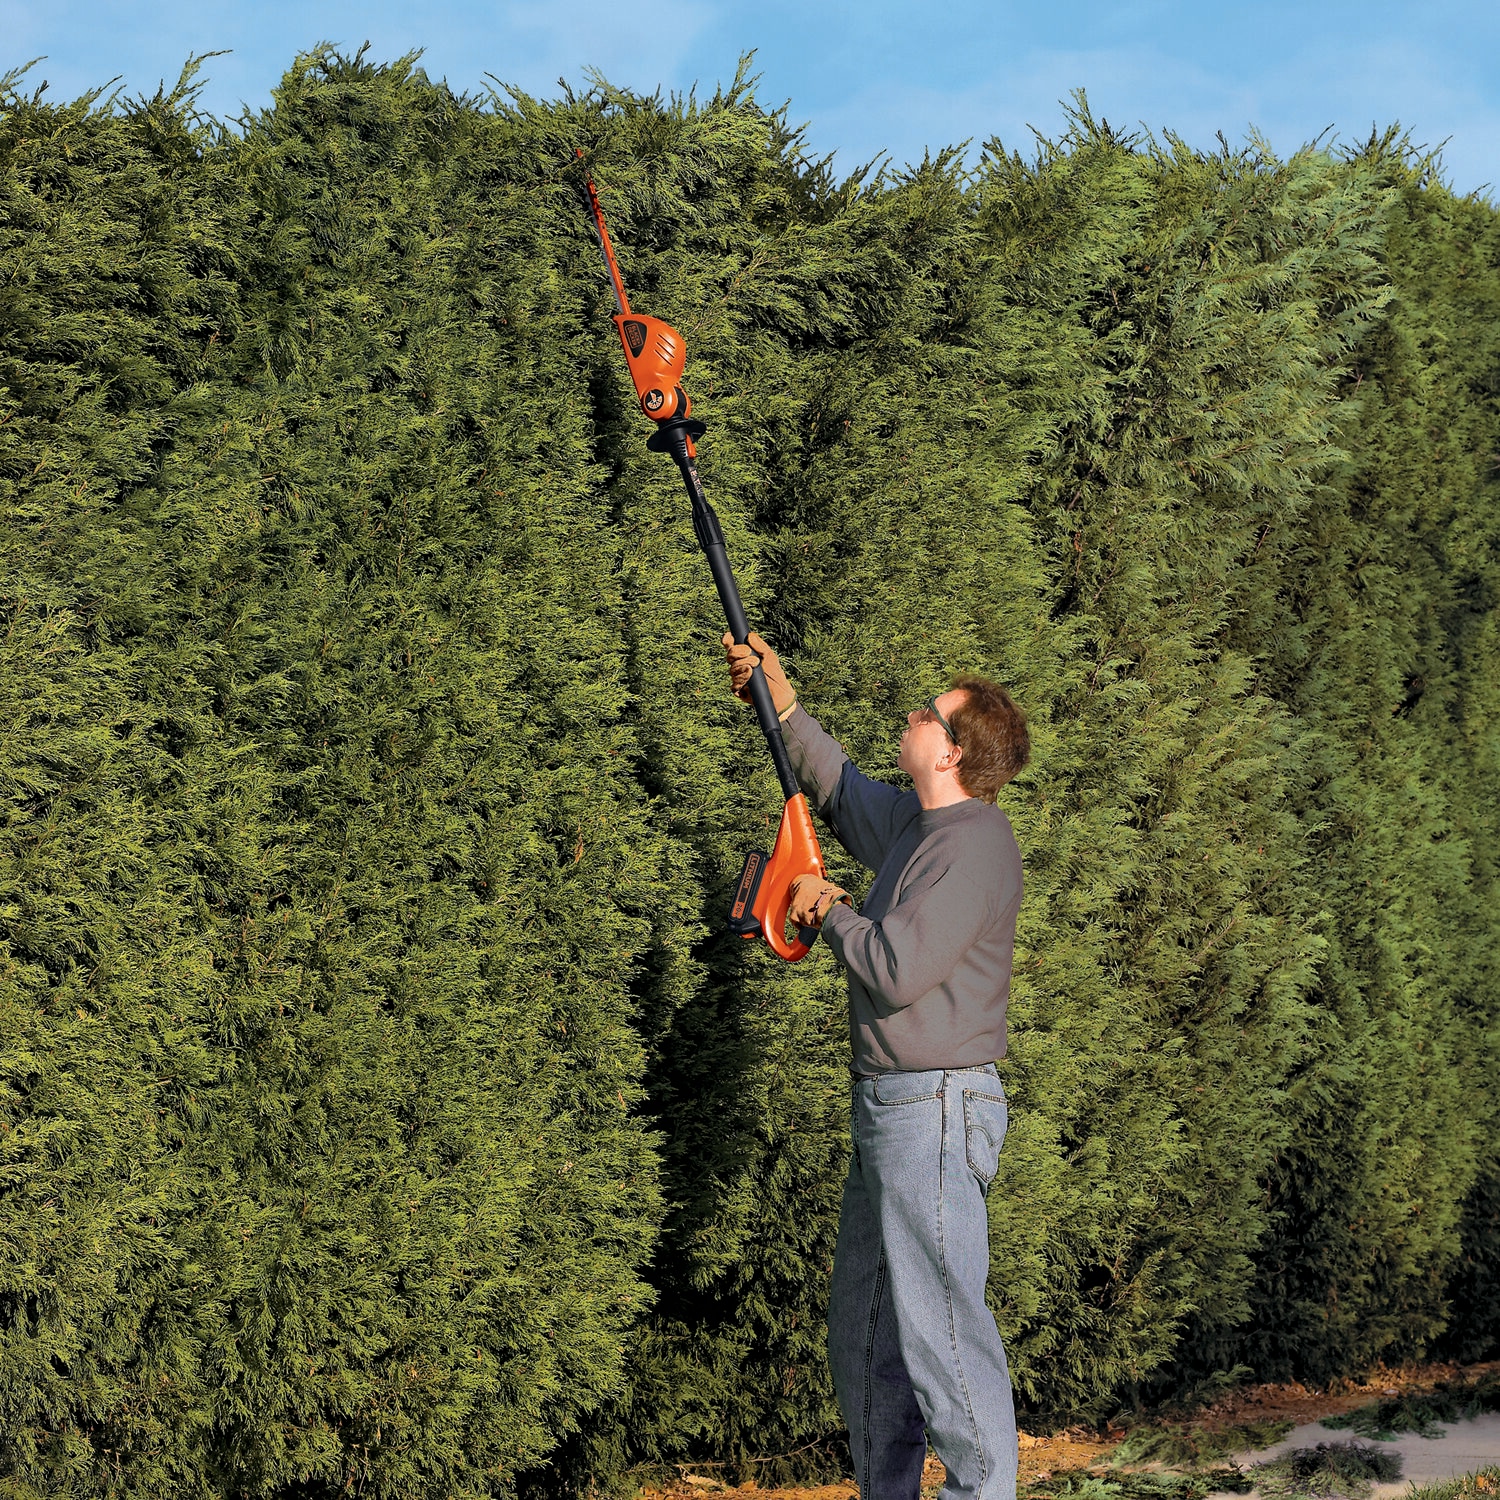  BLACK+DECKER 20V MAX Cordless Pole Hedge Trimmer, 18-Inch  (LPHT120) : Power Hedge Trimmers : Patio, Lawn & Garden